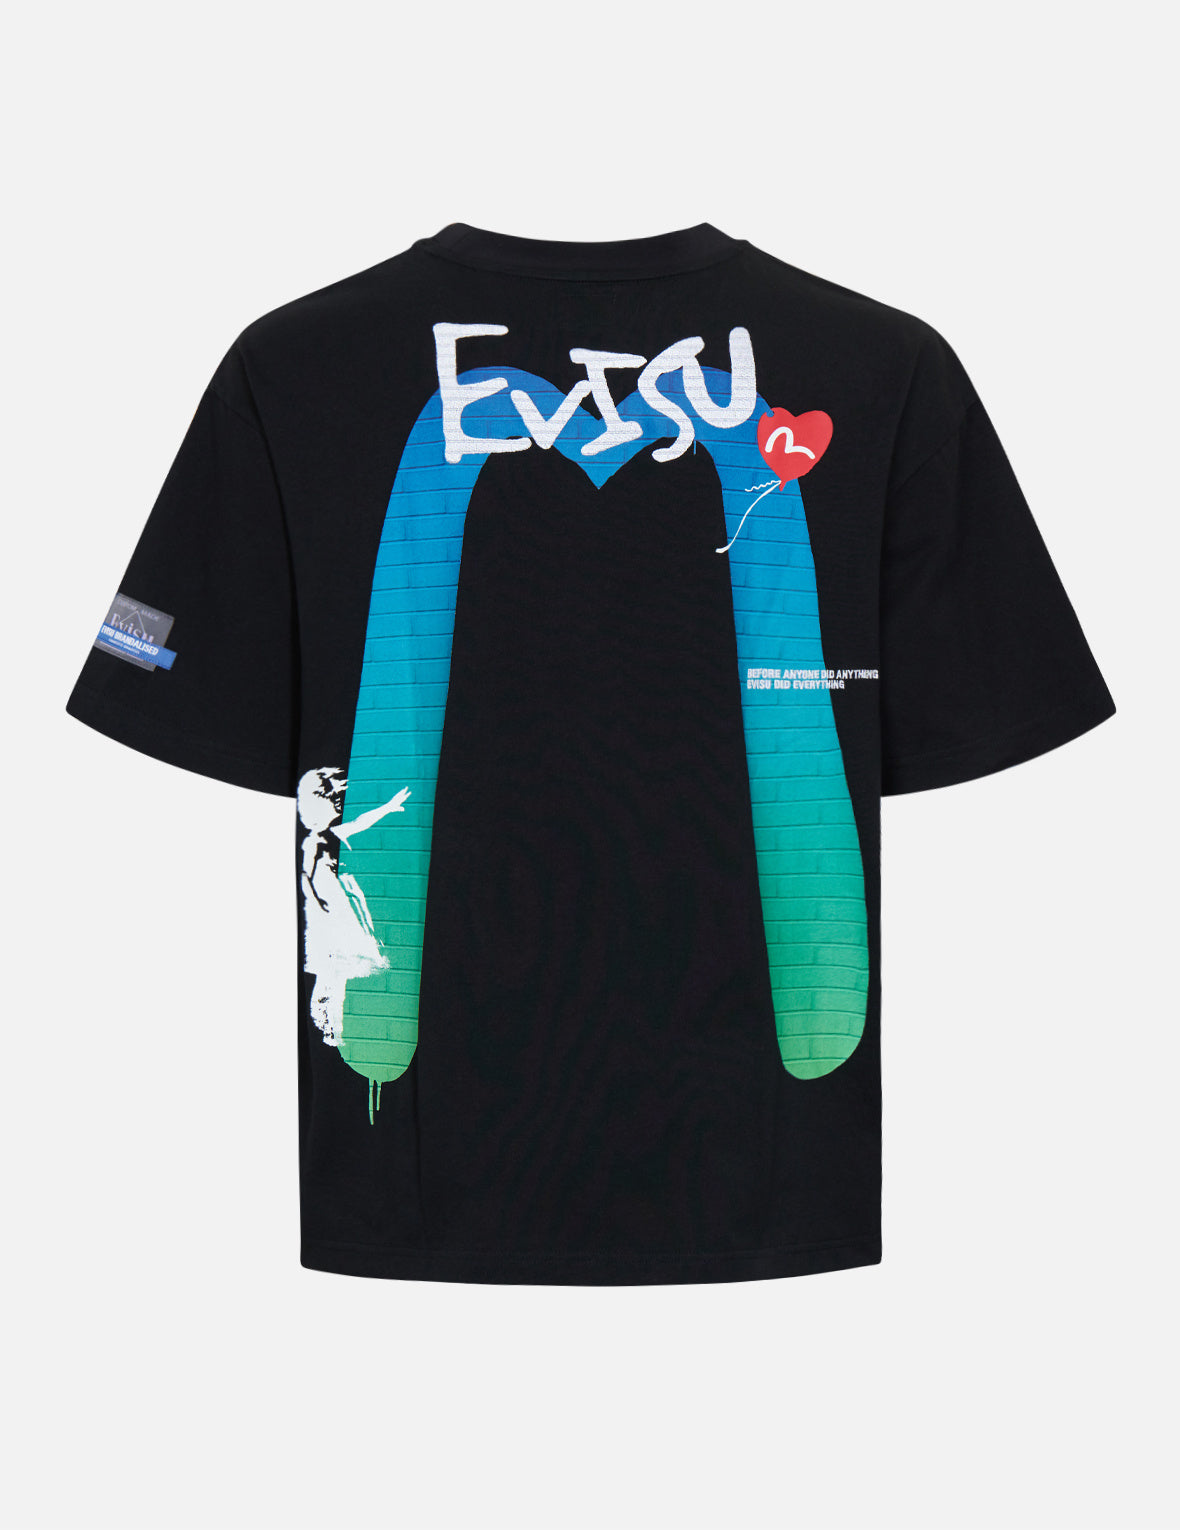 Evisu Brandalised "Balloon Girl" and Daicock Print Tee - Shop Streetwear, Sneakers, Slippers and Gifts online | Malaysia - The Factory KL